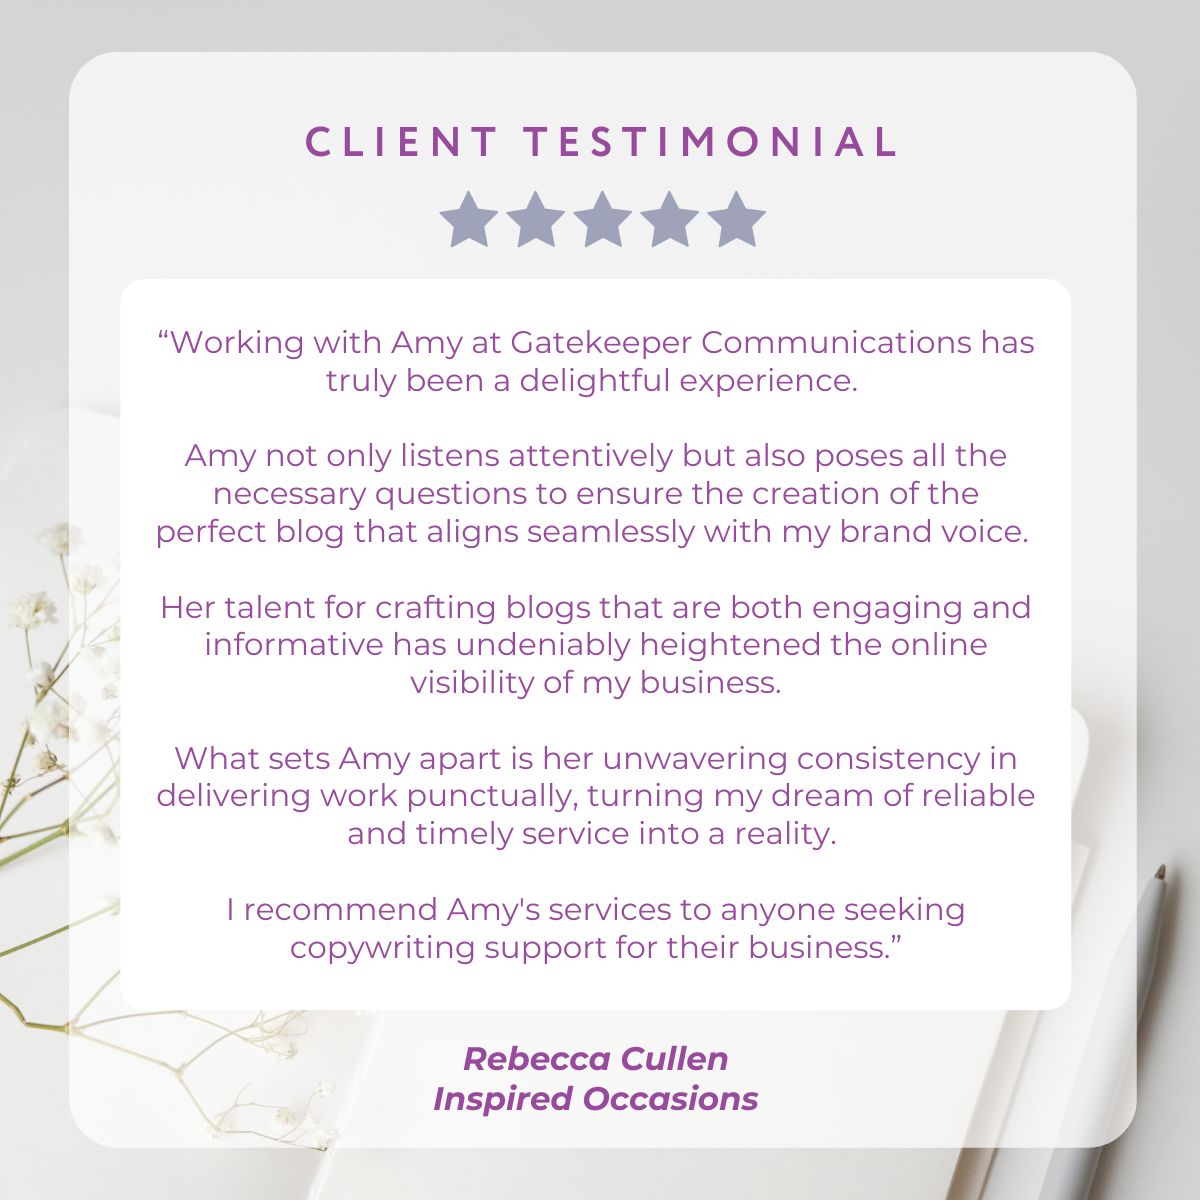 Testimonial for Amy Dawson at Gatekeeper Communications with the words "Working with Amy at Gatekeeper Communications has truly been a delightful experience. Amy not only listens attentively but also poses all the necessary questions to ensure the creation of the perfect blog that aligns seamlessly with my brand voice. Her talent for crafting blogs that are both engaging and informative has undeniably heightened the online visibility of my business. What sets Amy apart is her unwavering consistency in delivering work punctually, turning my dream of reliable and timely service into a reality. I recommend Amy's services to anyone seeking copywriting support for their business."